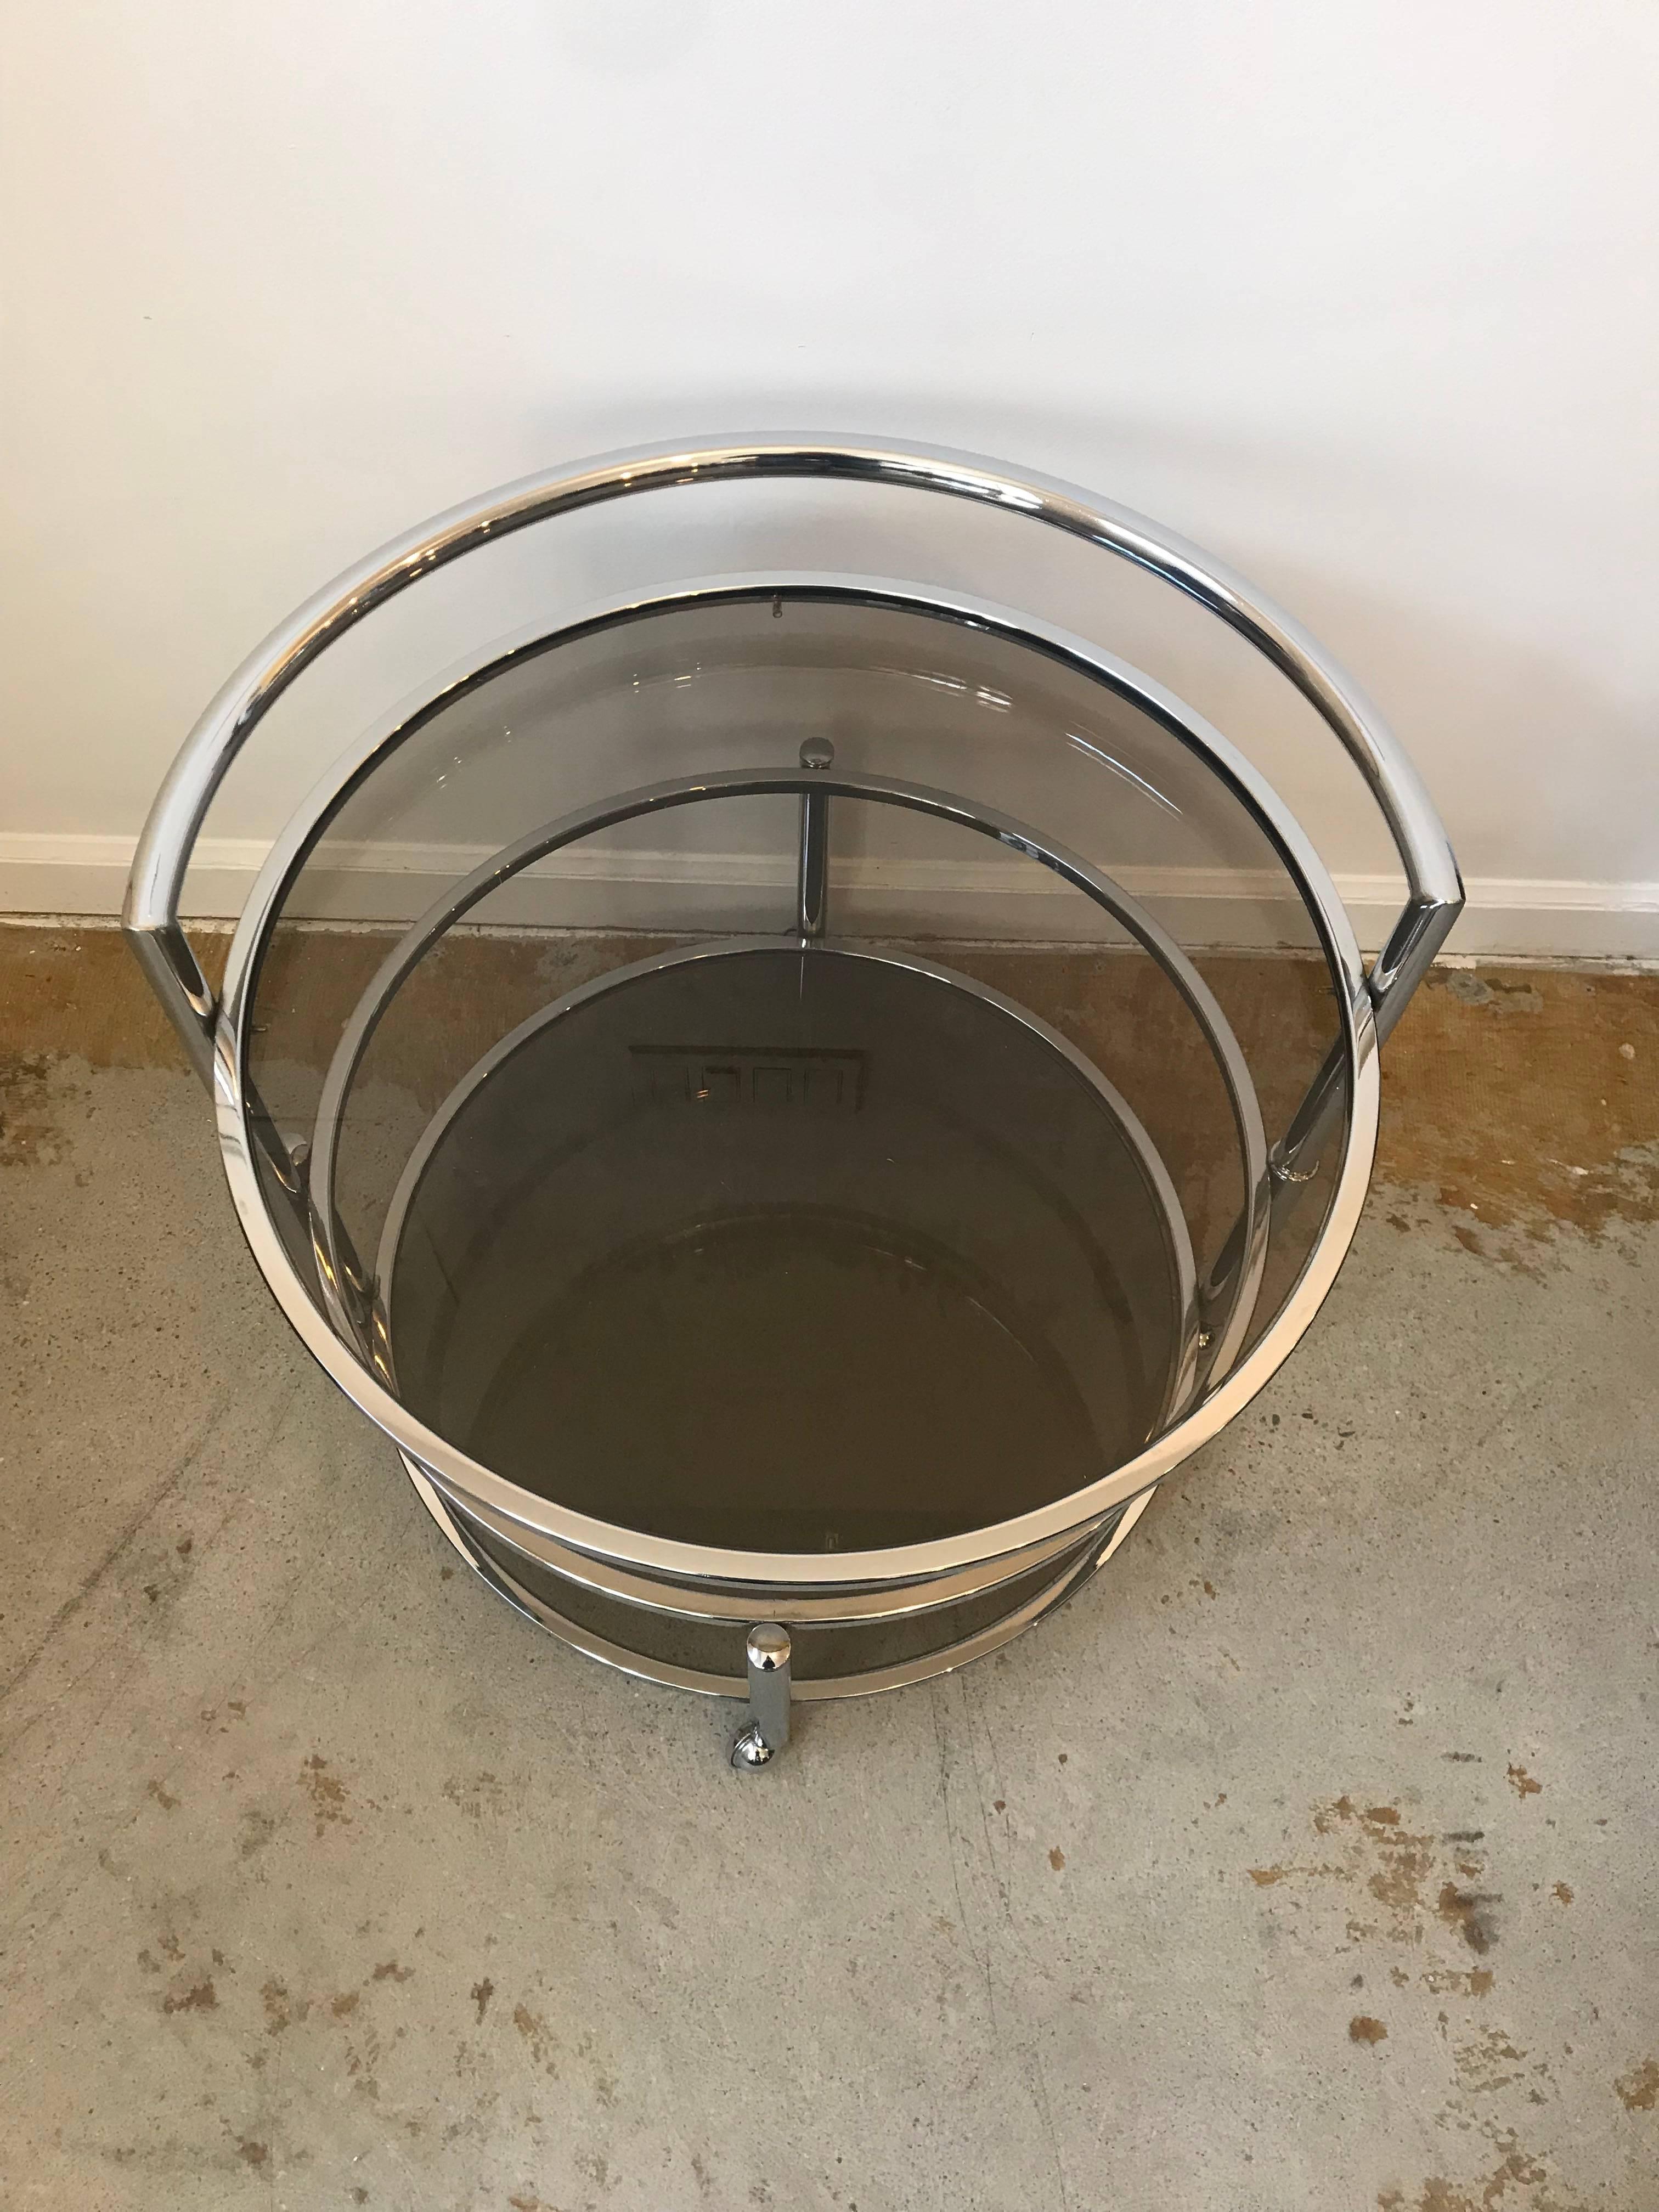 Very cool Mid-Century Modern two-tier round side or coffee table that expands if desired. Chrome frame with smoked glass, on castors. Very similar to the designs of Milo Baughman.